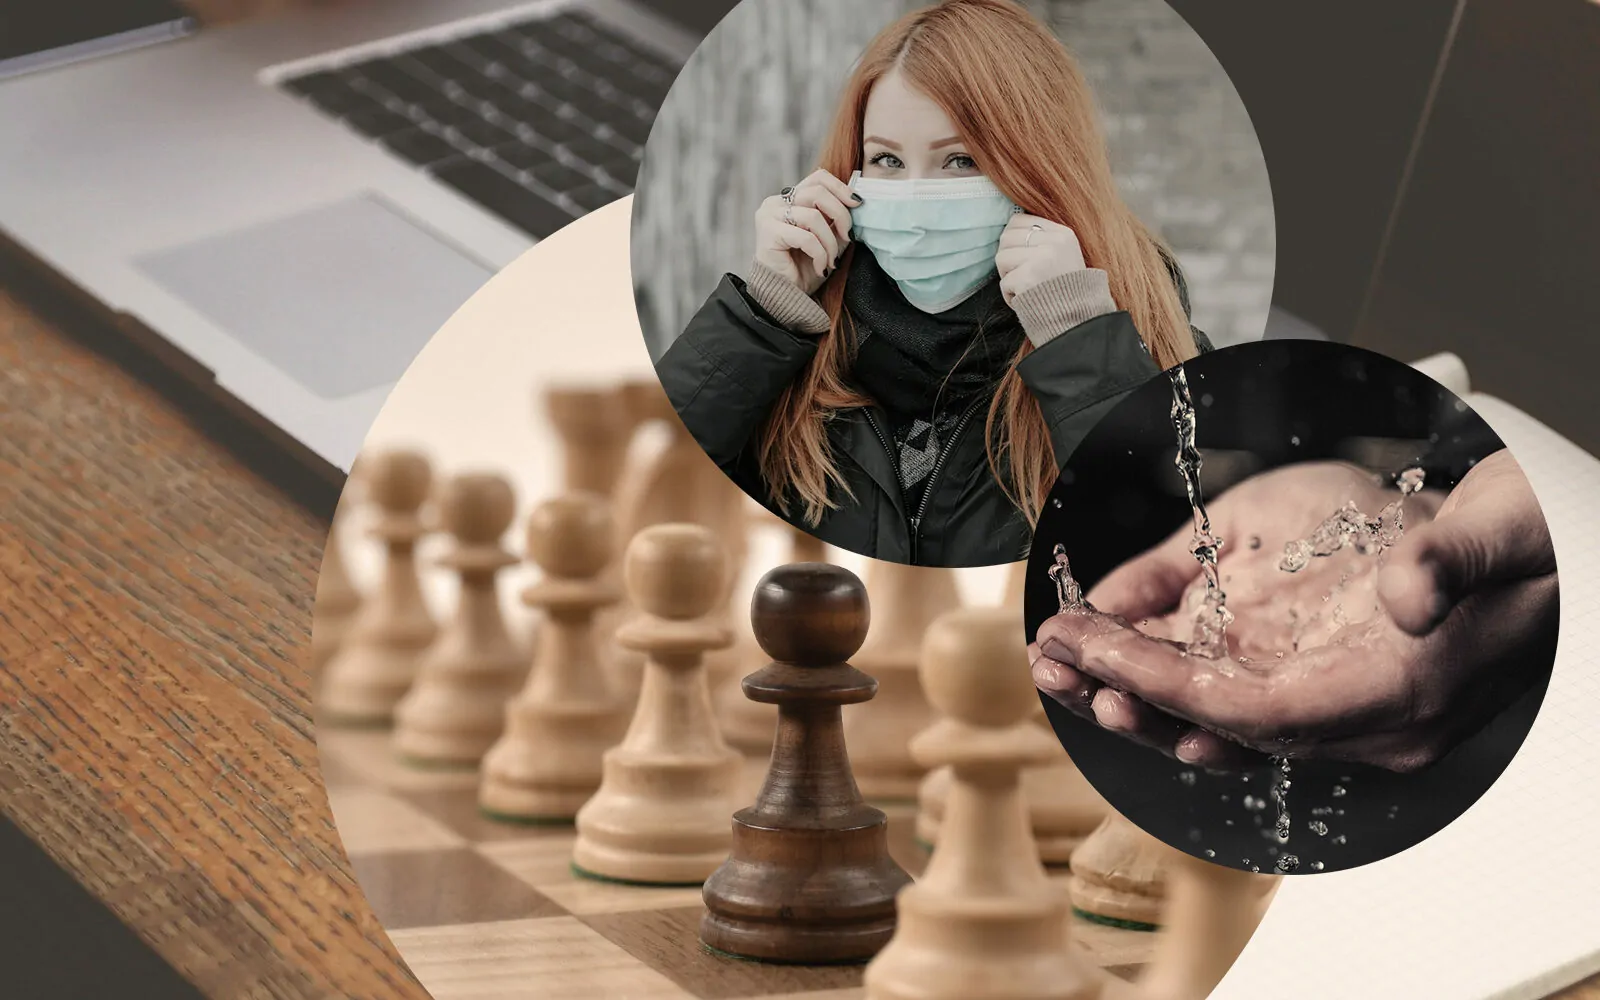 Managing the Chessboard of Human Society: Lessons from the Online